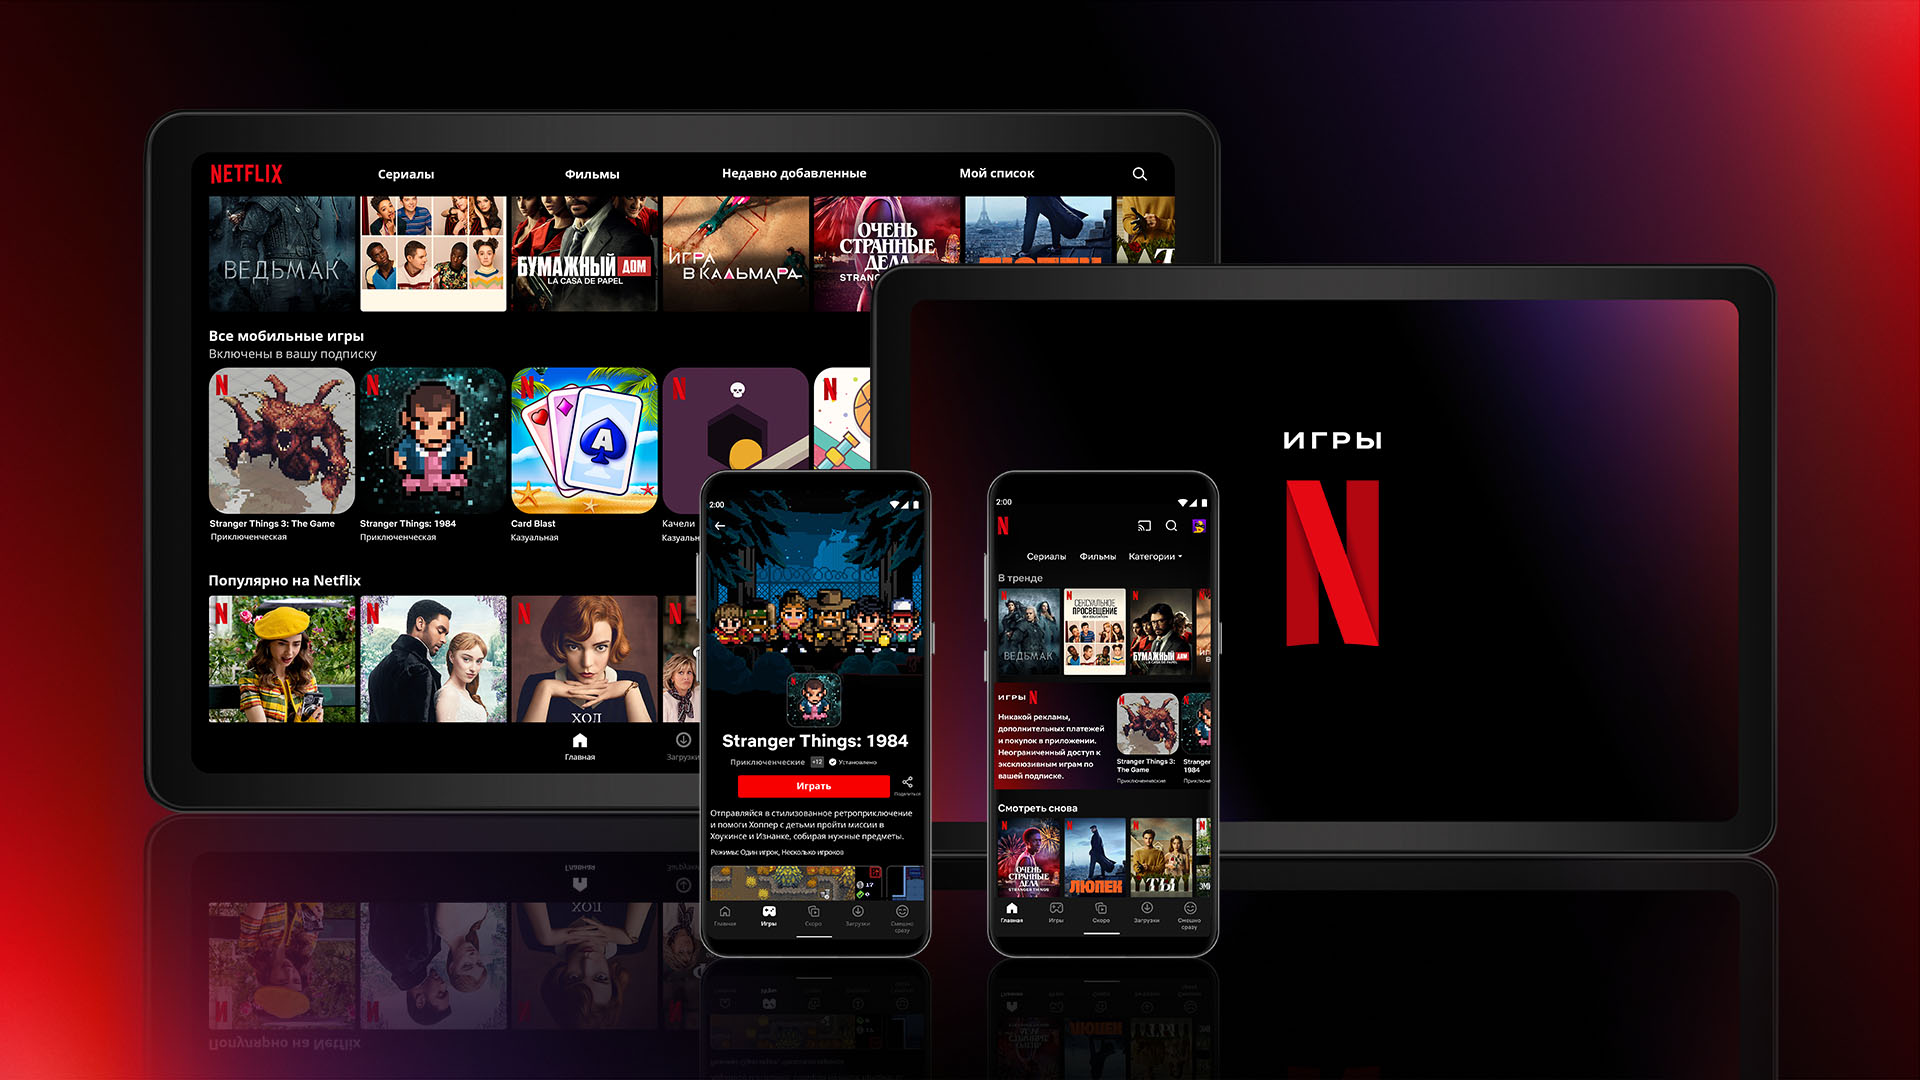 Let The Games Begin A New Way To Experience Entertainment On Mobile About Netflix